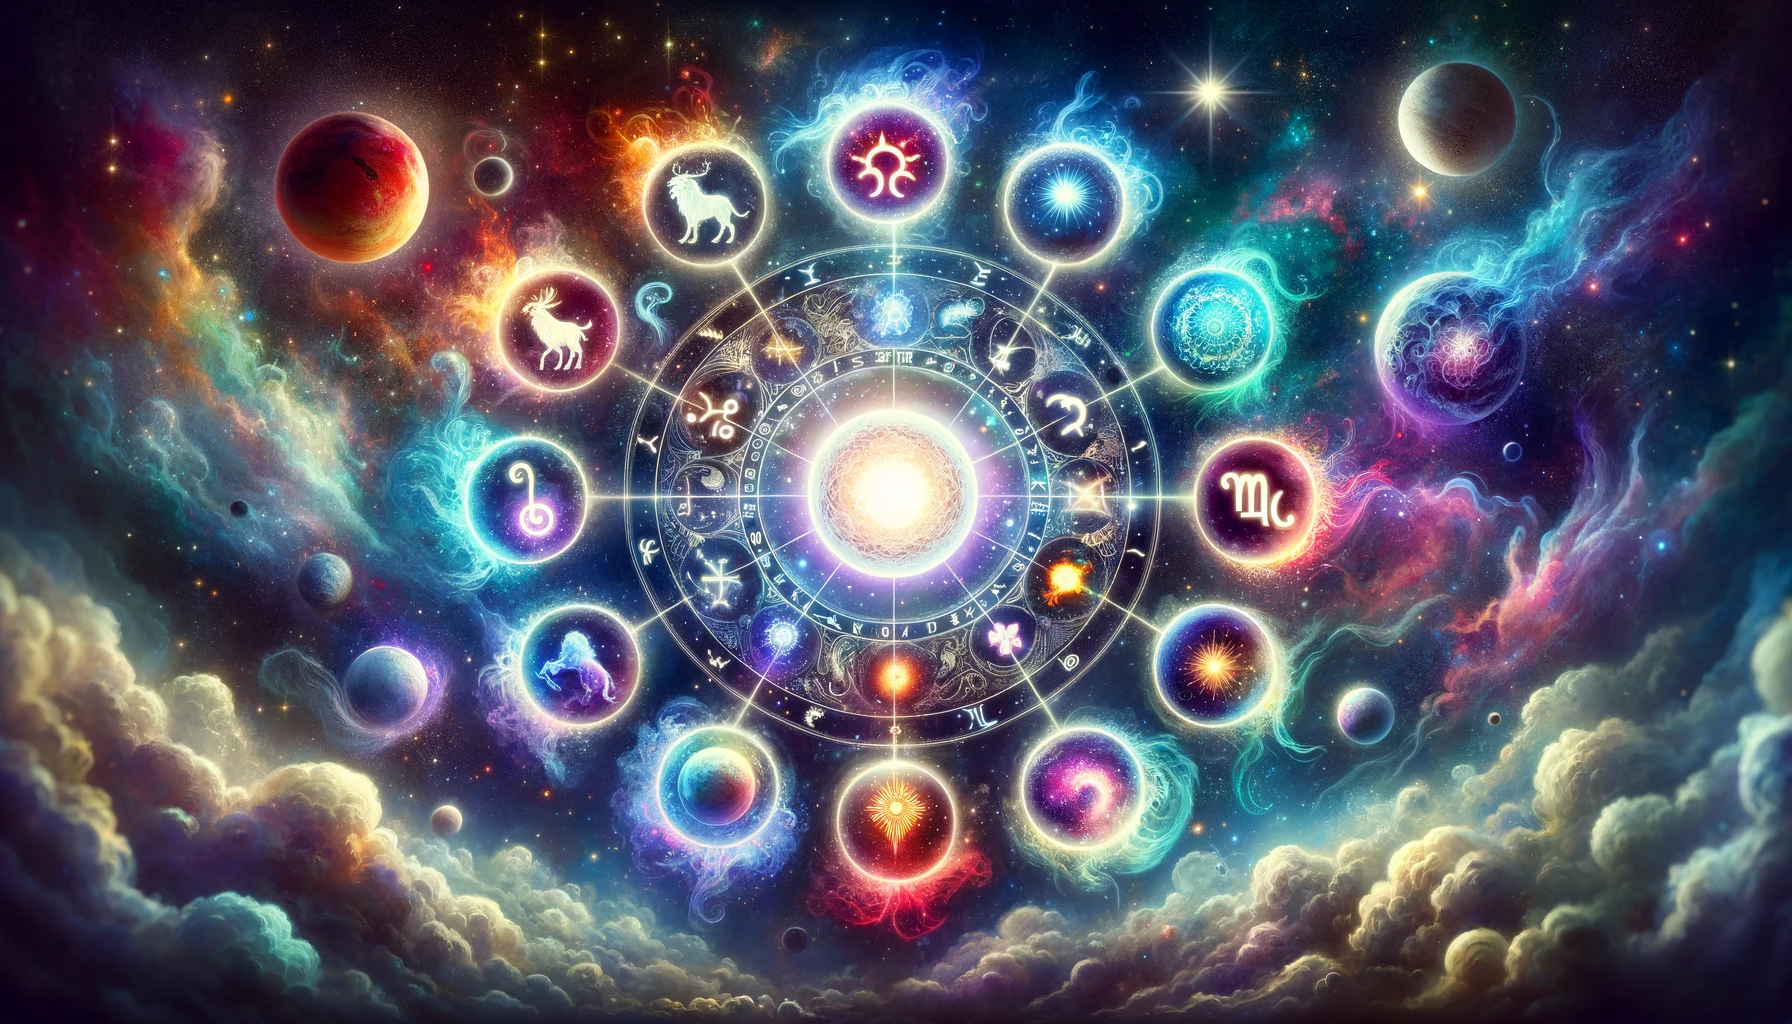 ·E 2023 11 25 15.23.33   A vibrant and mystical featured blog image for an astrology website, depicting a cosmic landscape with all 12 zodiac signs arranged in a circle around.png